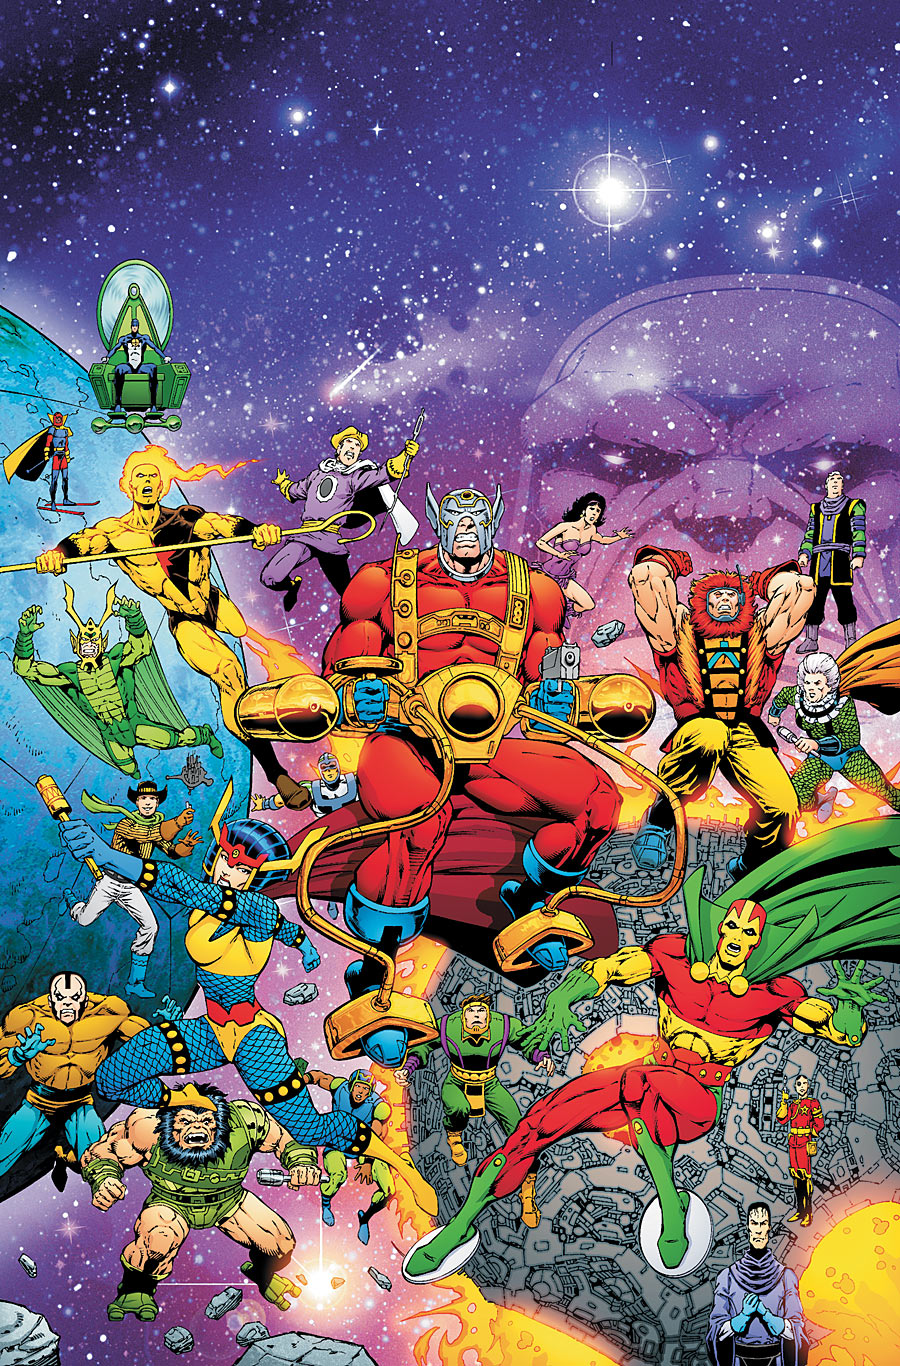 THE DEATH OF THE NEW GODS #1